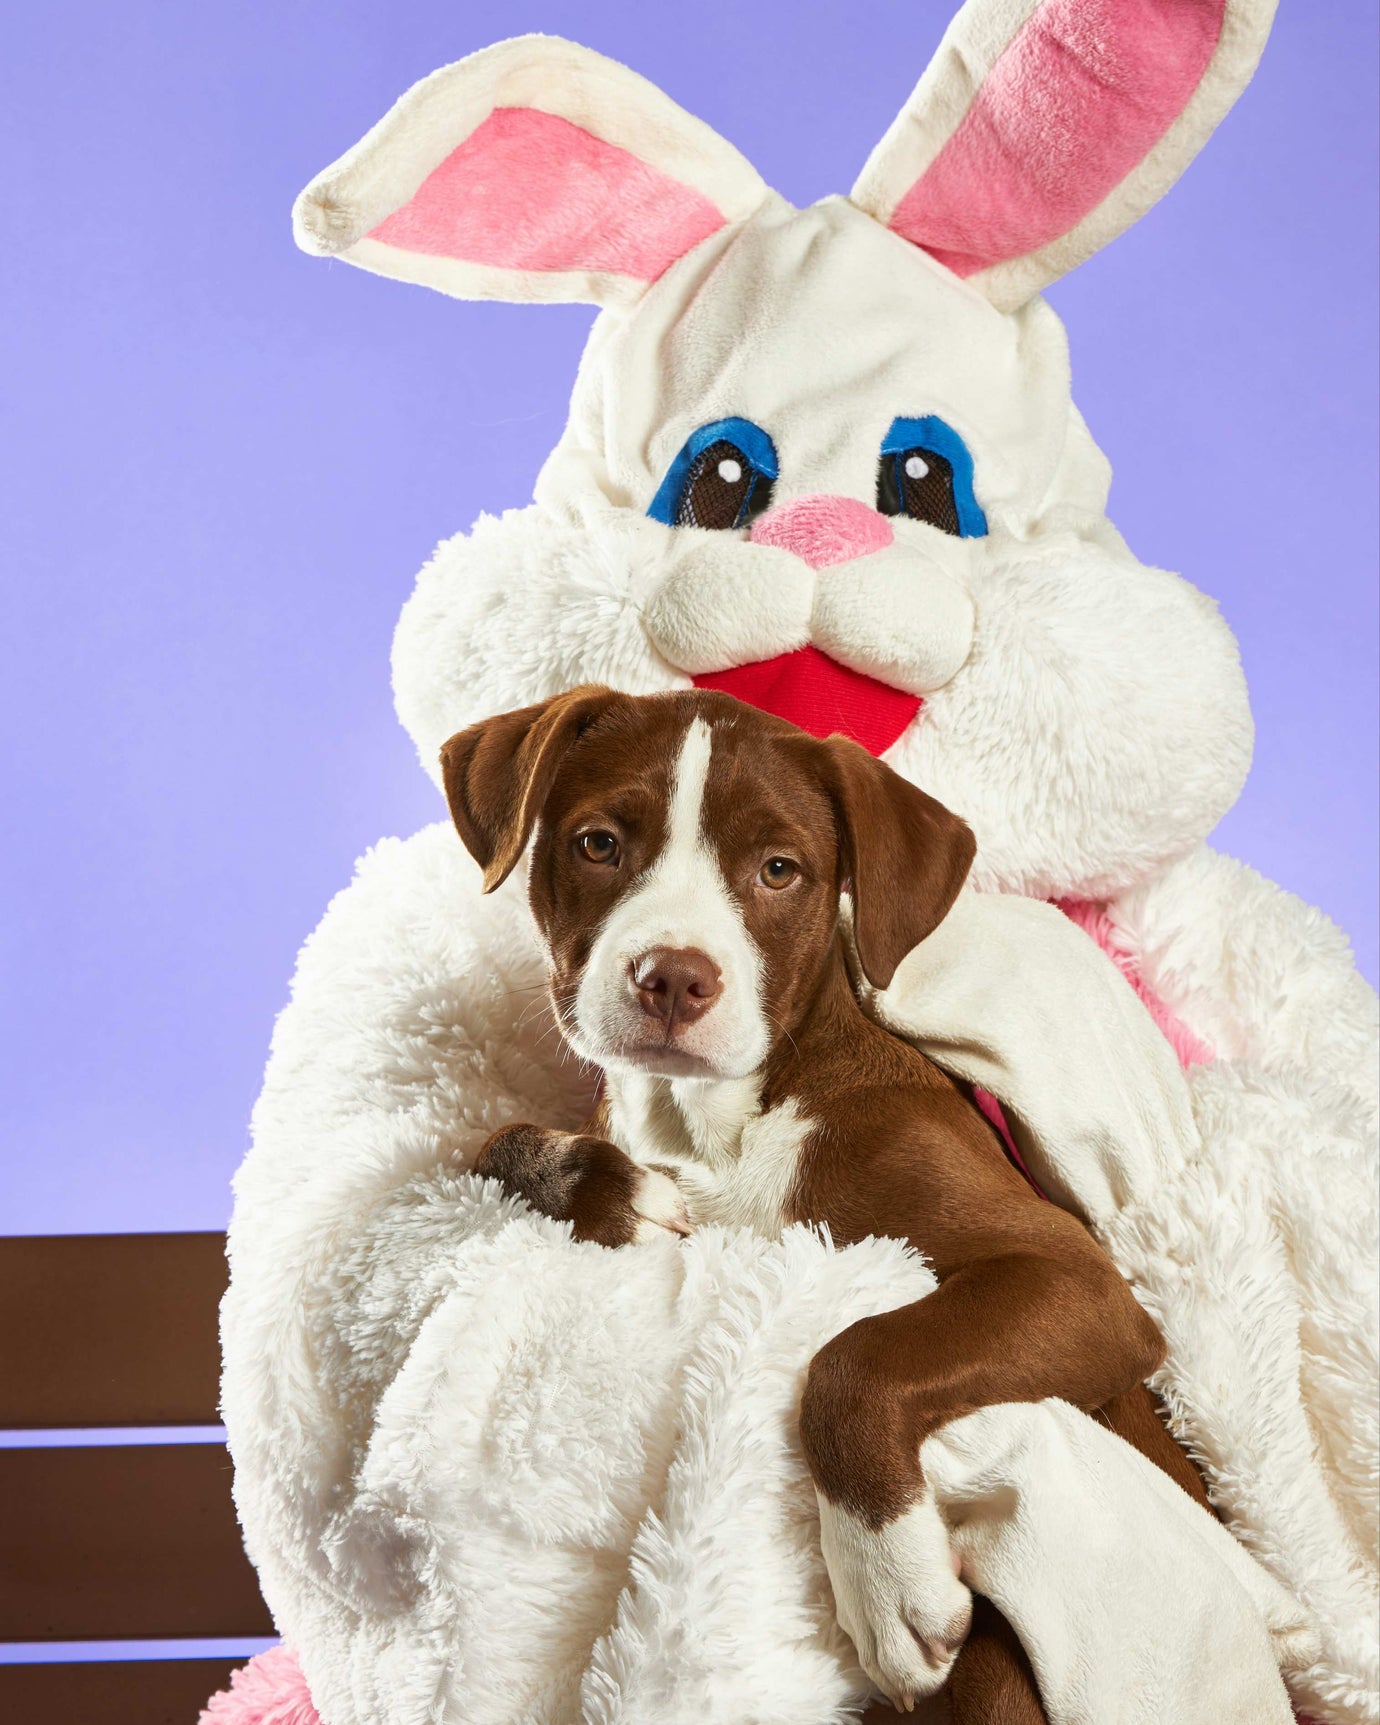 A brown and white dog snuggled in the arms of a person dressed as the Easter Bunny, representing the festive spirit at 2Kings' celebration of pets during the Easter holiday.